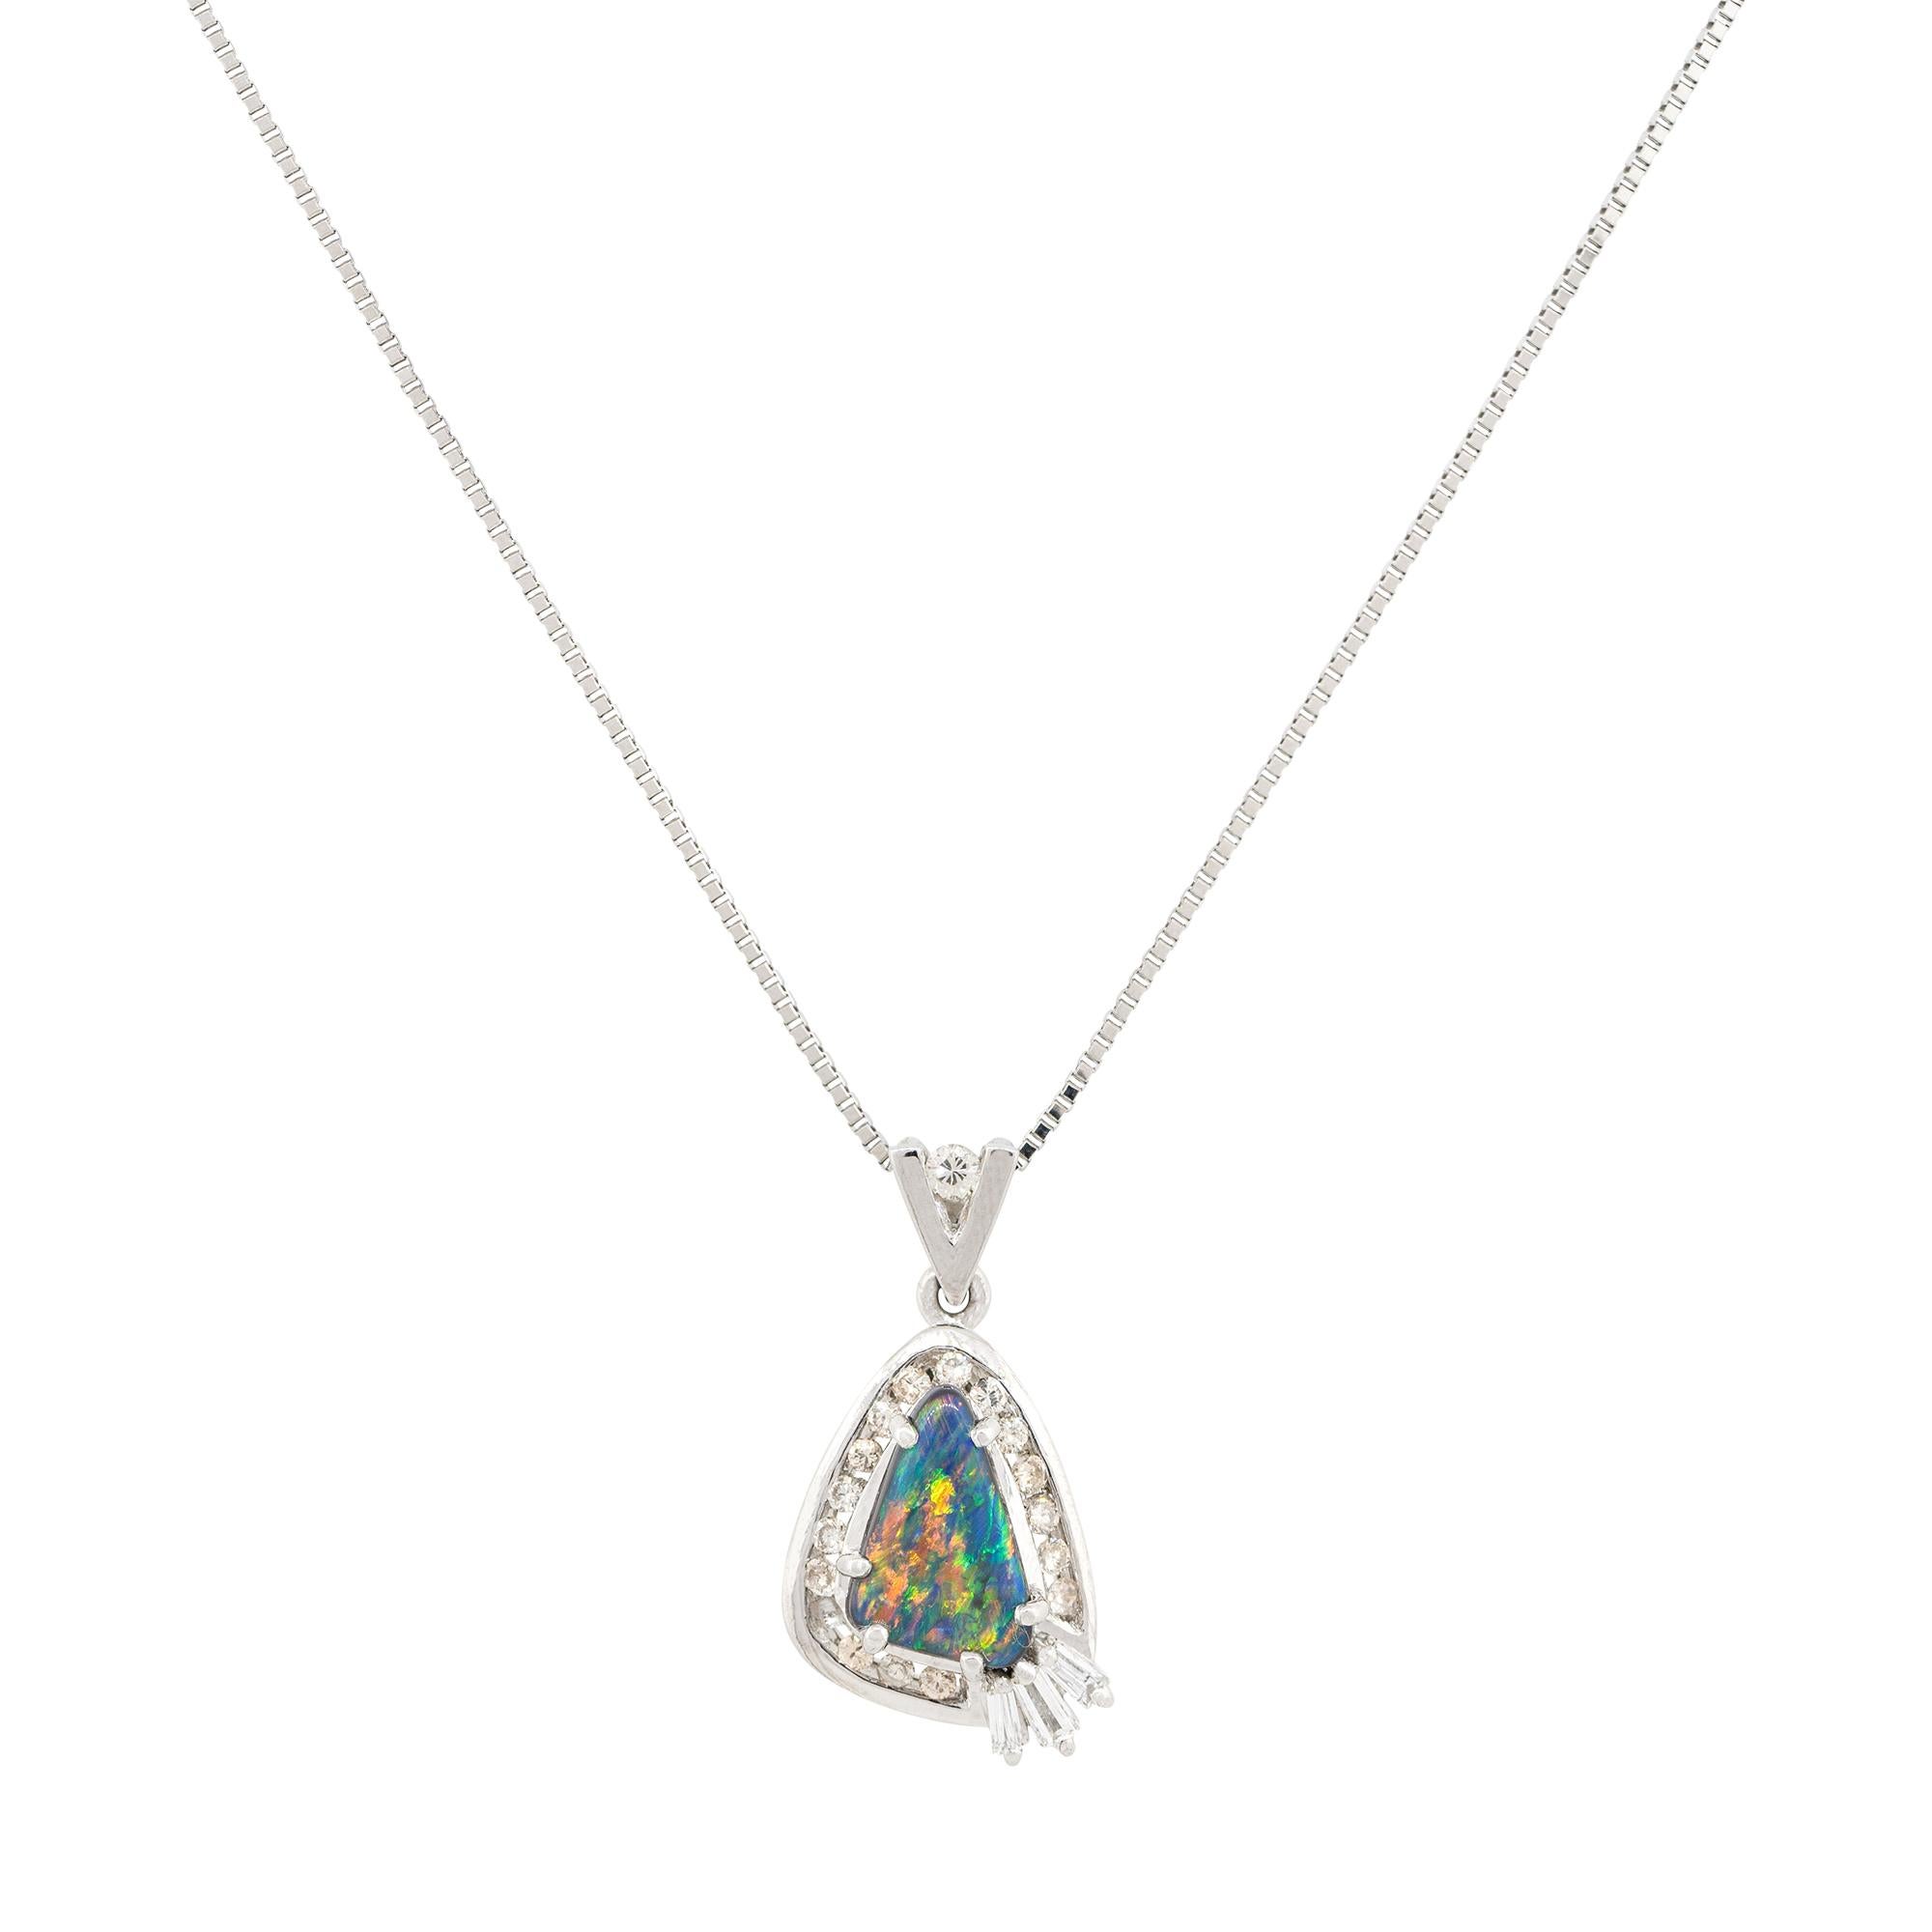 Material: Platinum
Gemstone Details: Triangle shaped Opal gemstone
Diamond Details: Round and baguette cut Diamonds. Diamonds are G/H in color and VS in clarity
Clasps: Lobster clasp
Total Weight: 6.6g (4.3dwt) 
Pendant measurements: 1.2